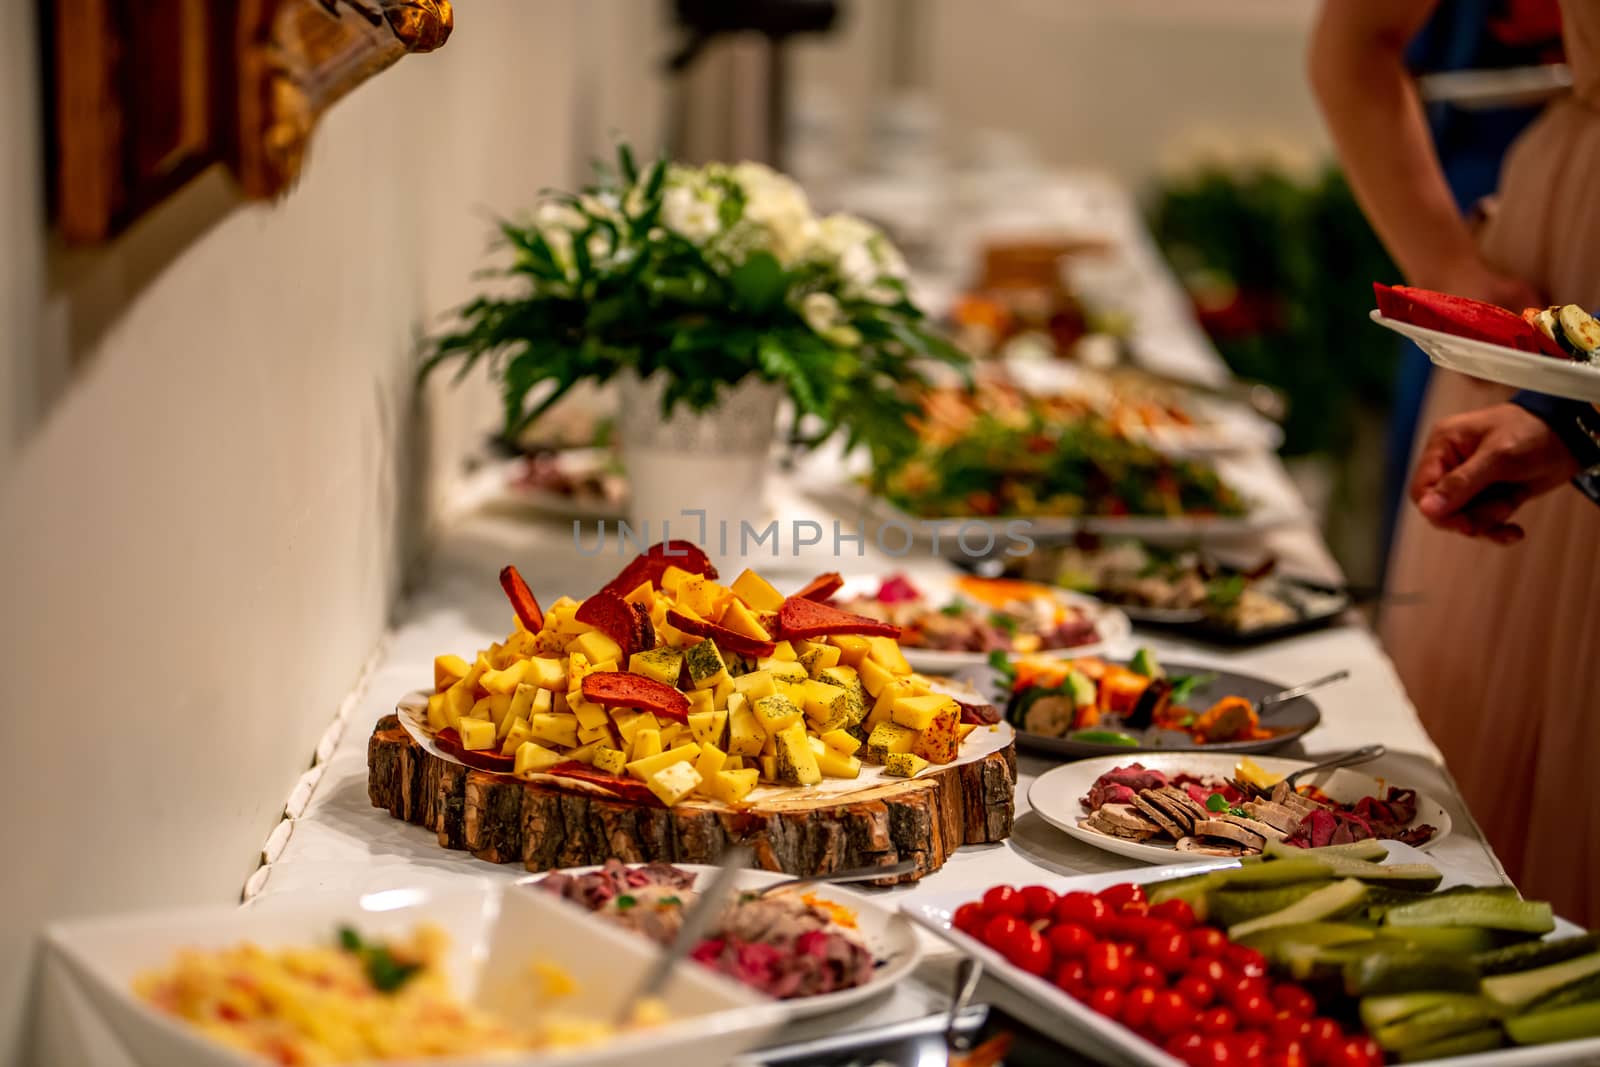 Cheese, vegetables, meat and other snacks on the festive table in the restaurant. Cheese snacks, vegetables and other appetizers on holiday table. Catering wedding table.